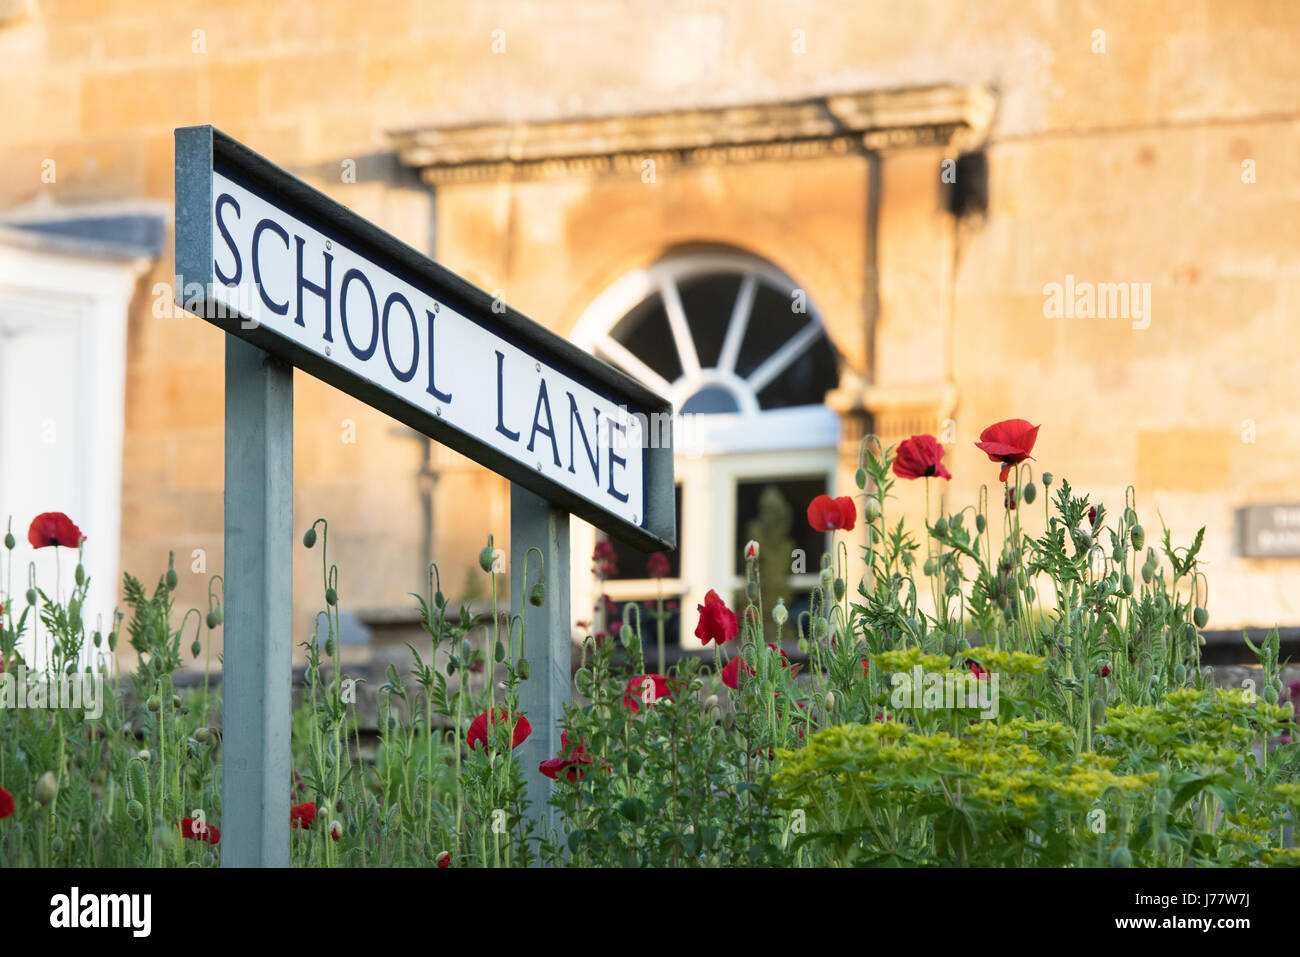 School Lane sign and red poppies in Blockley, Cotswolds, Gloucestershire, England Stock Photo